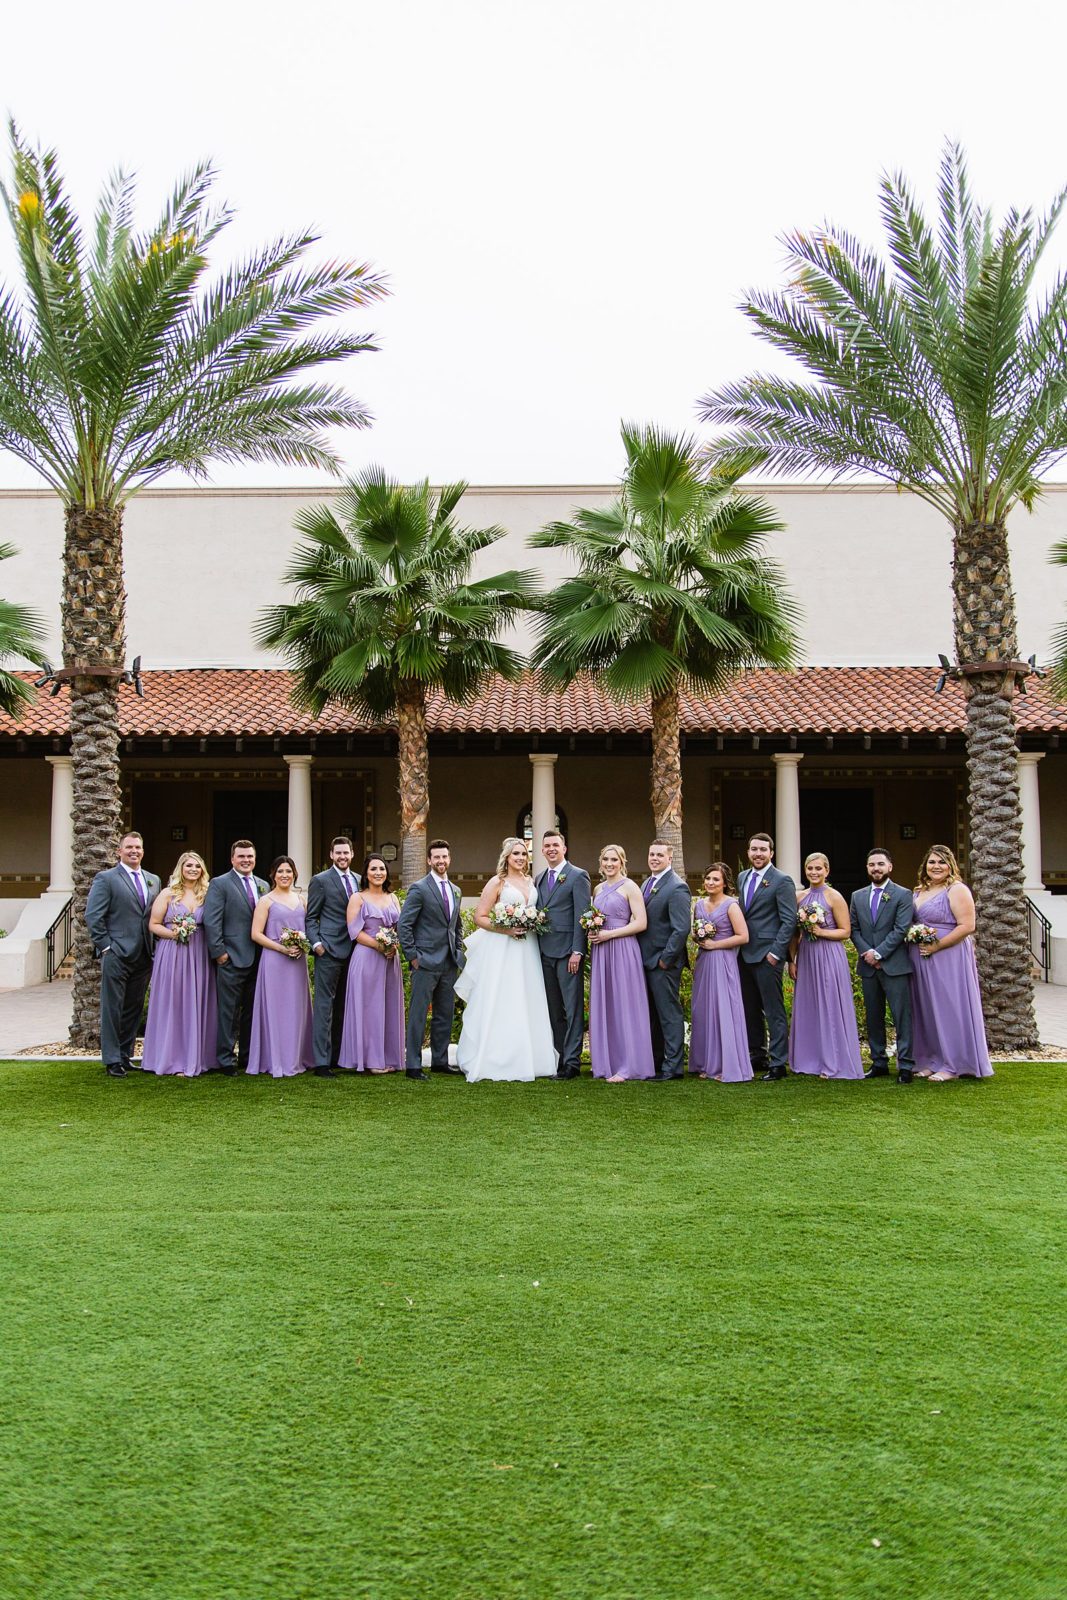 Bridal party together at a The Scottsdale Resort at McCormick Ranch wedding by Arizona wedding photographer PMA Photography.